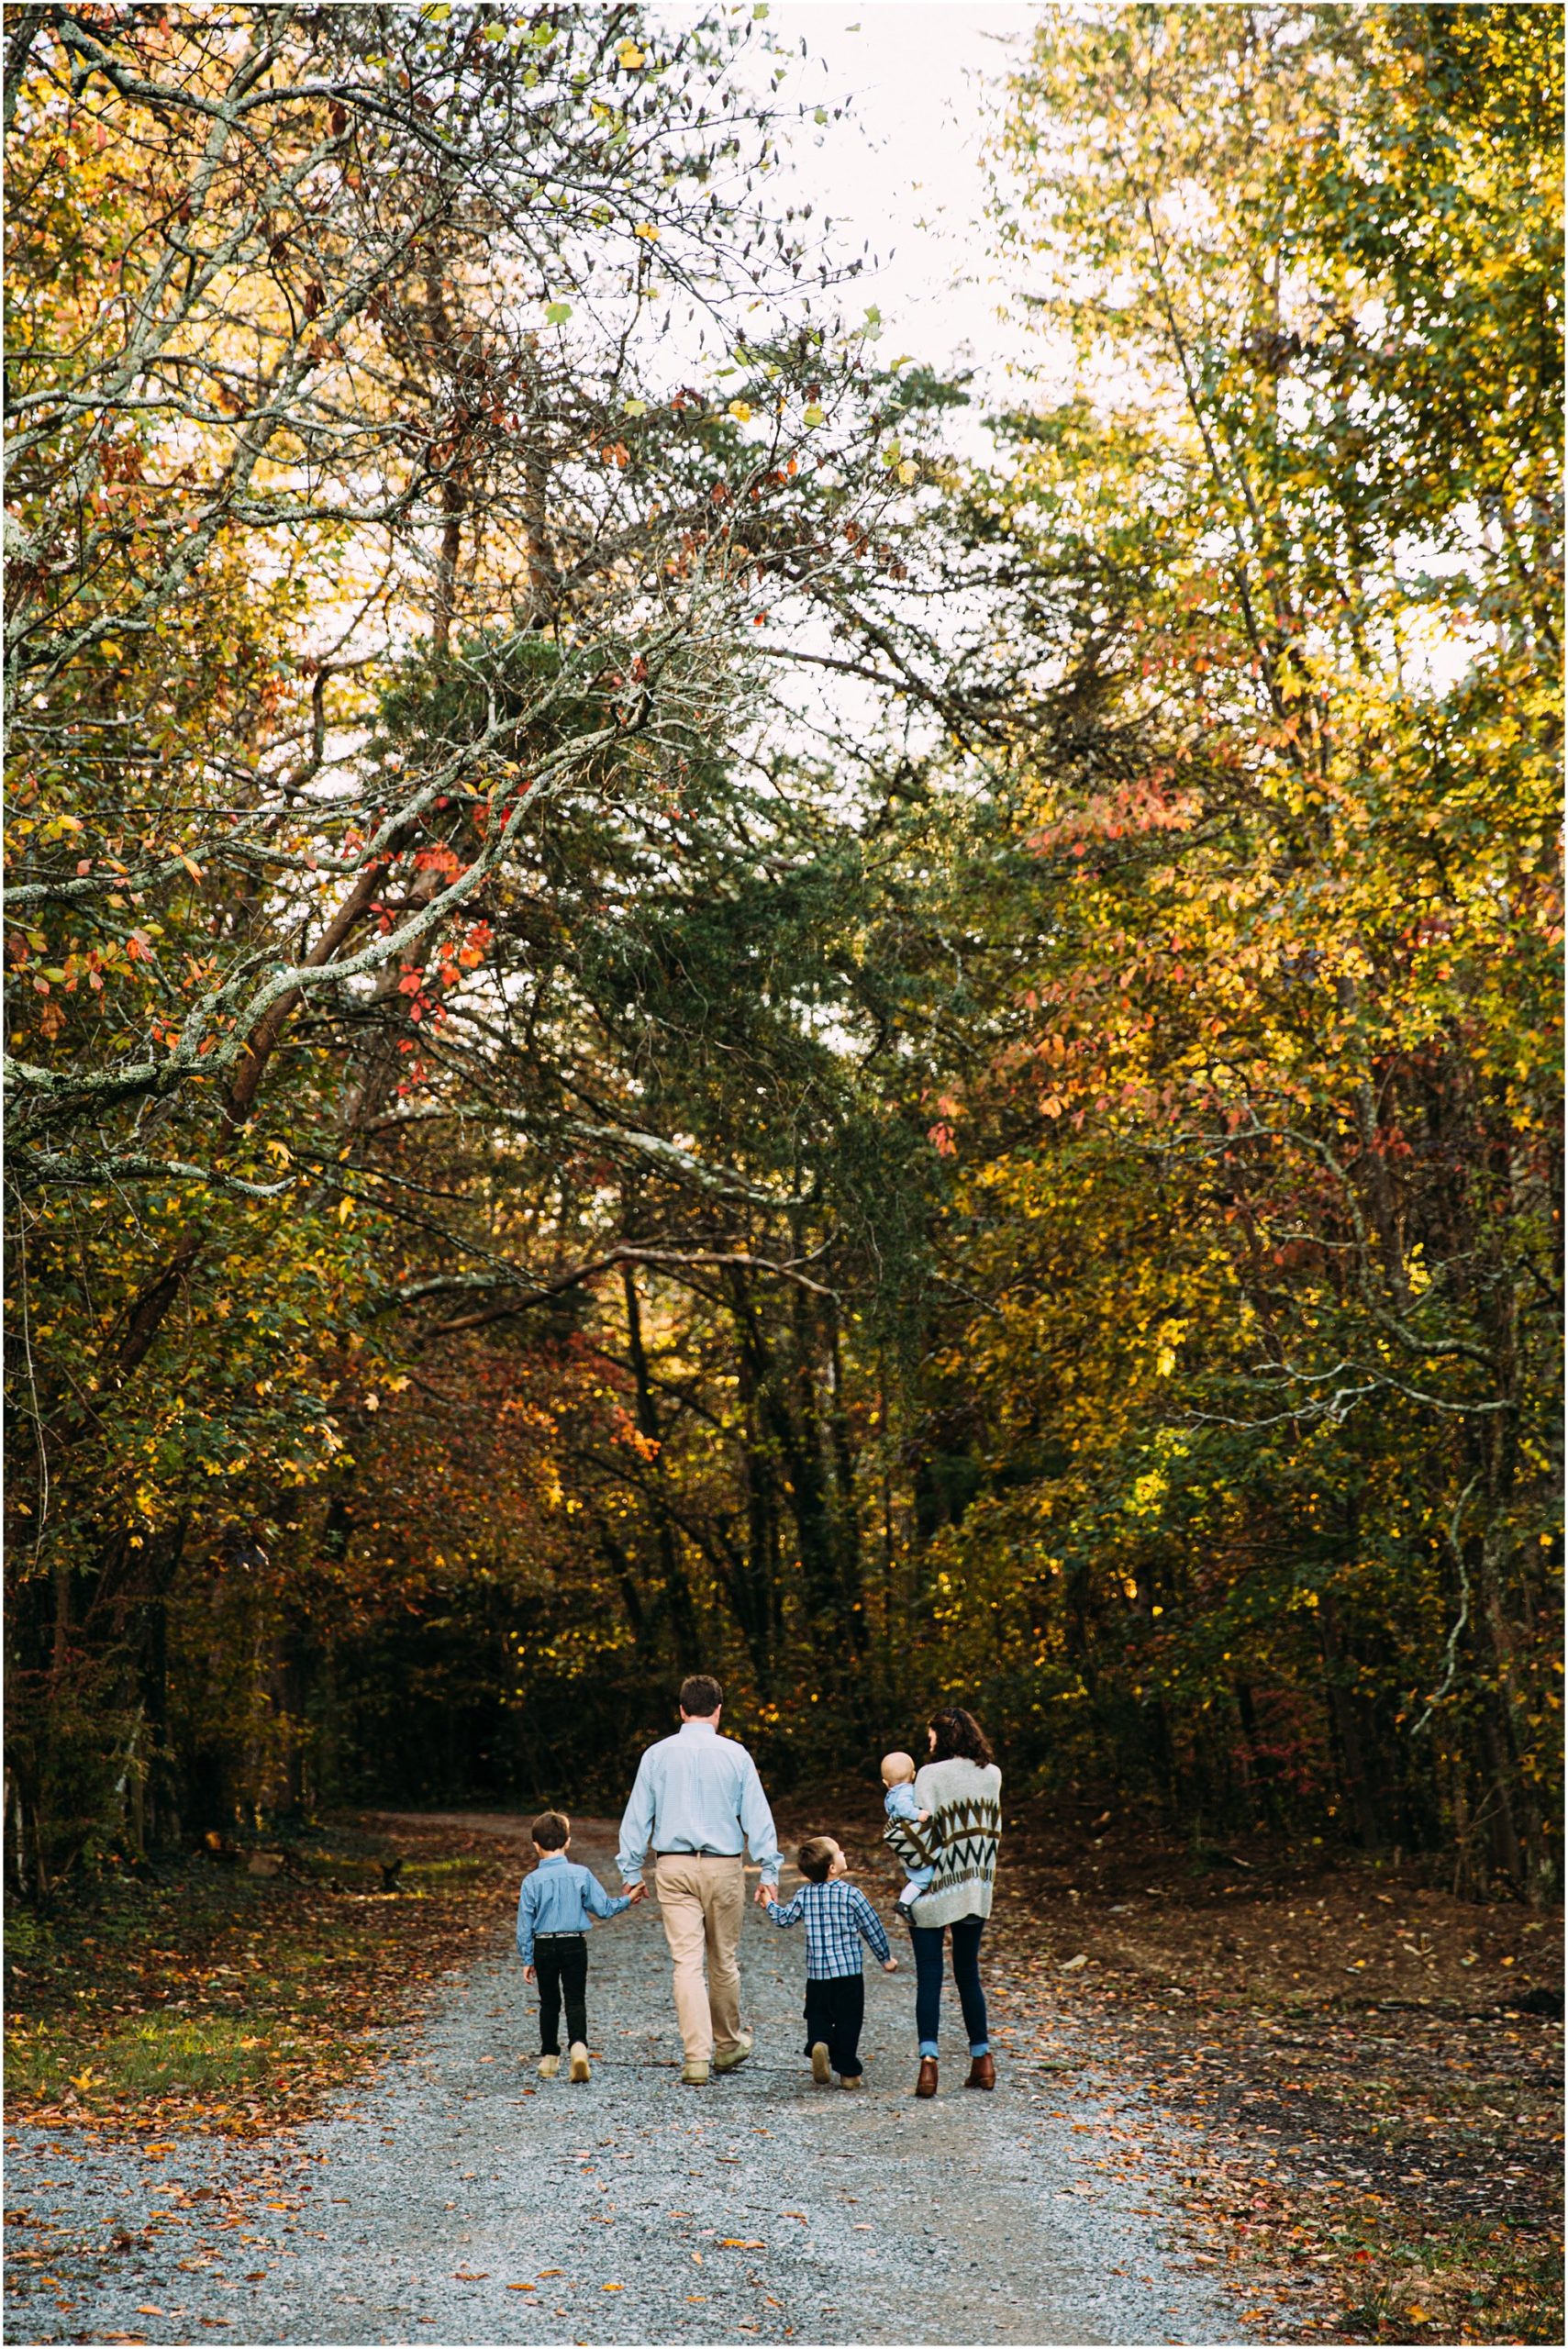 Family of five walking down gravel path under autumn trees in Chattanooga